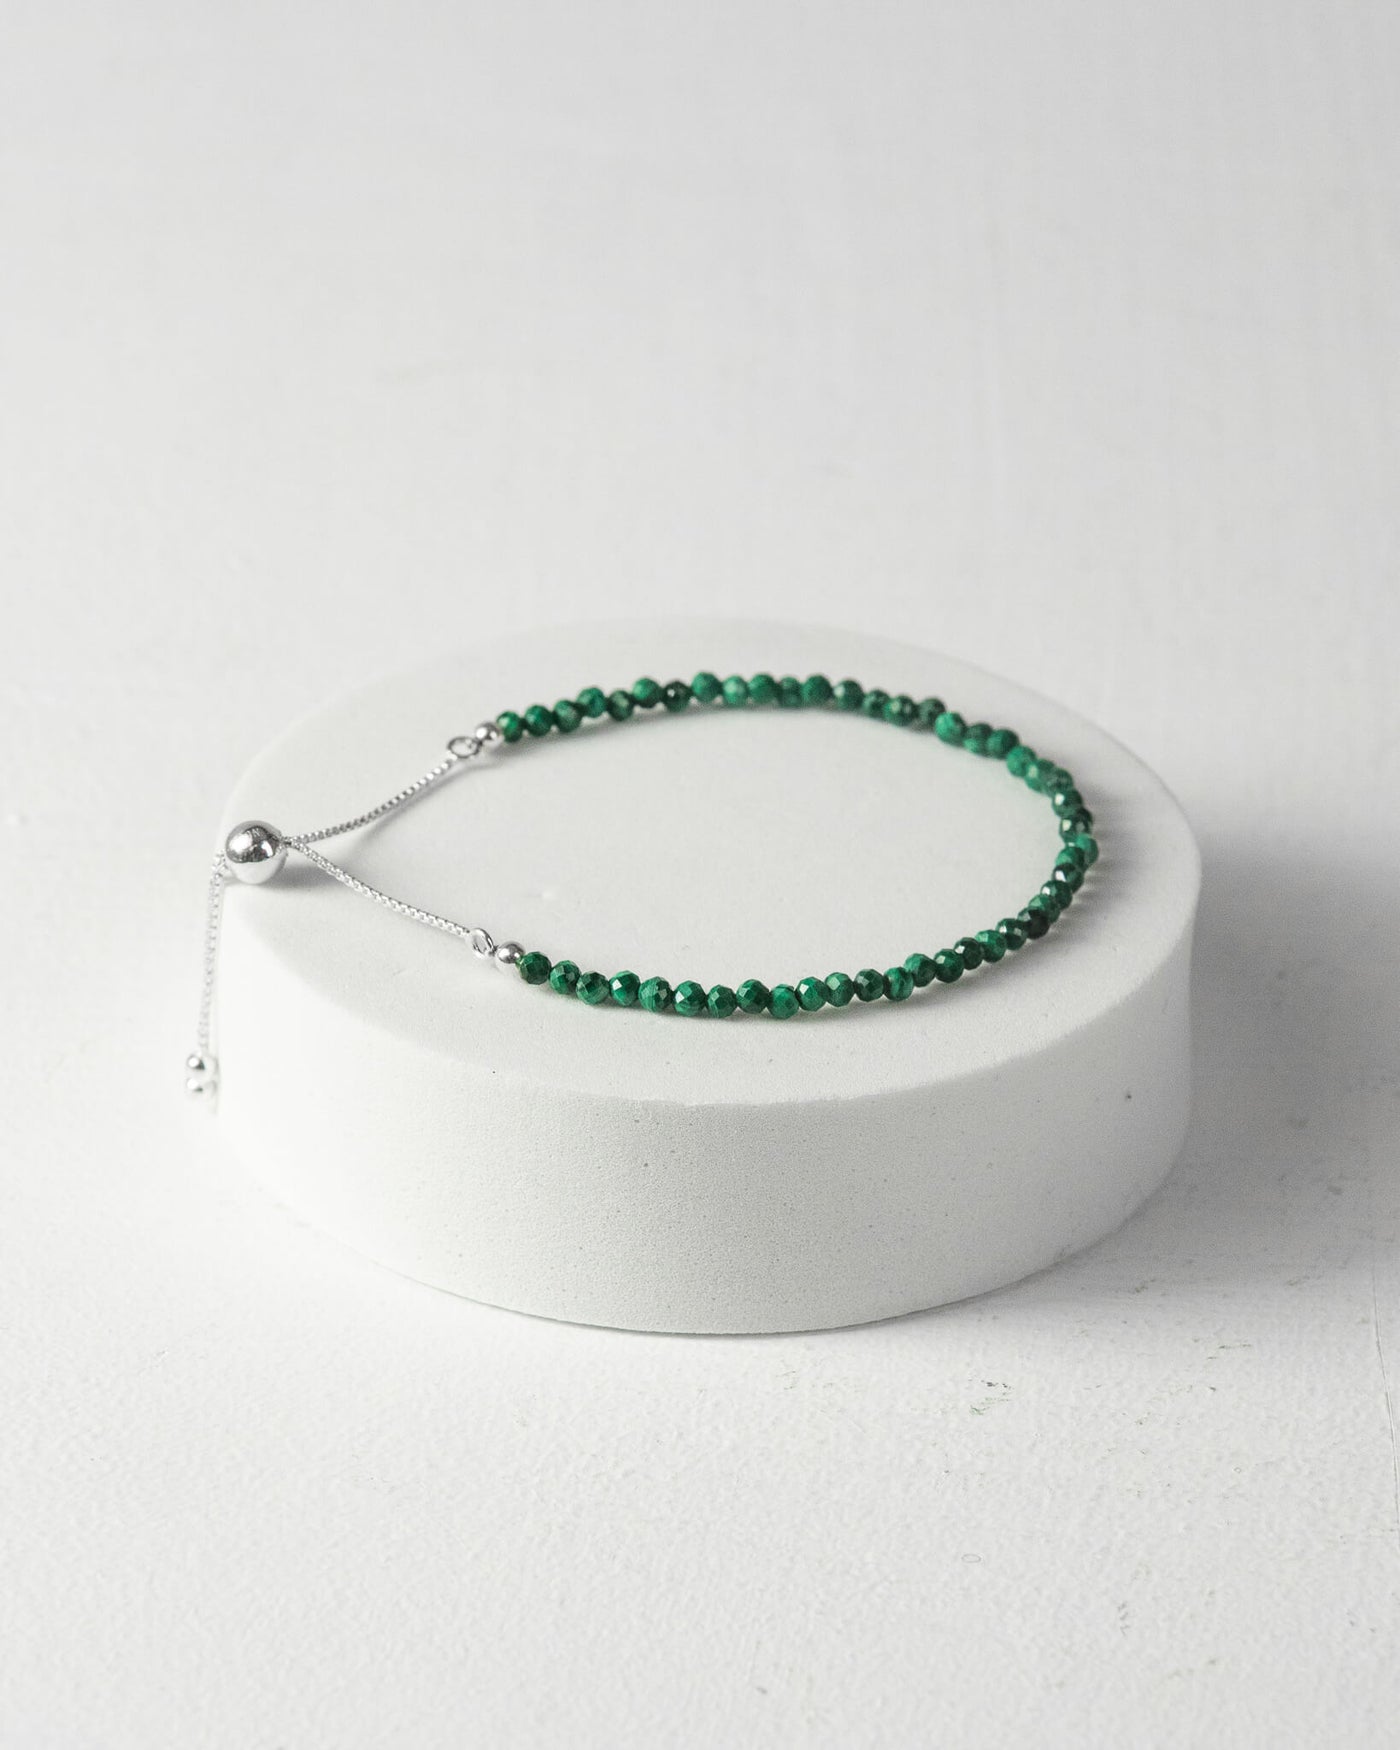 Malachite 3mm Faceted Bead Bracelet 925 Sterling Silver